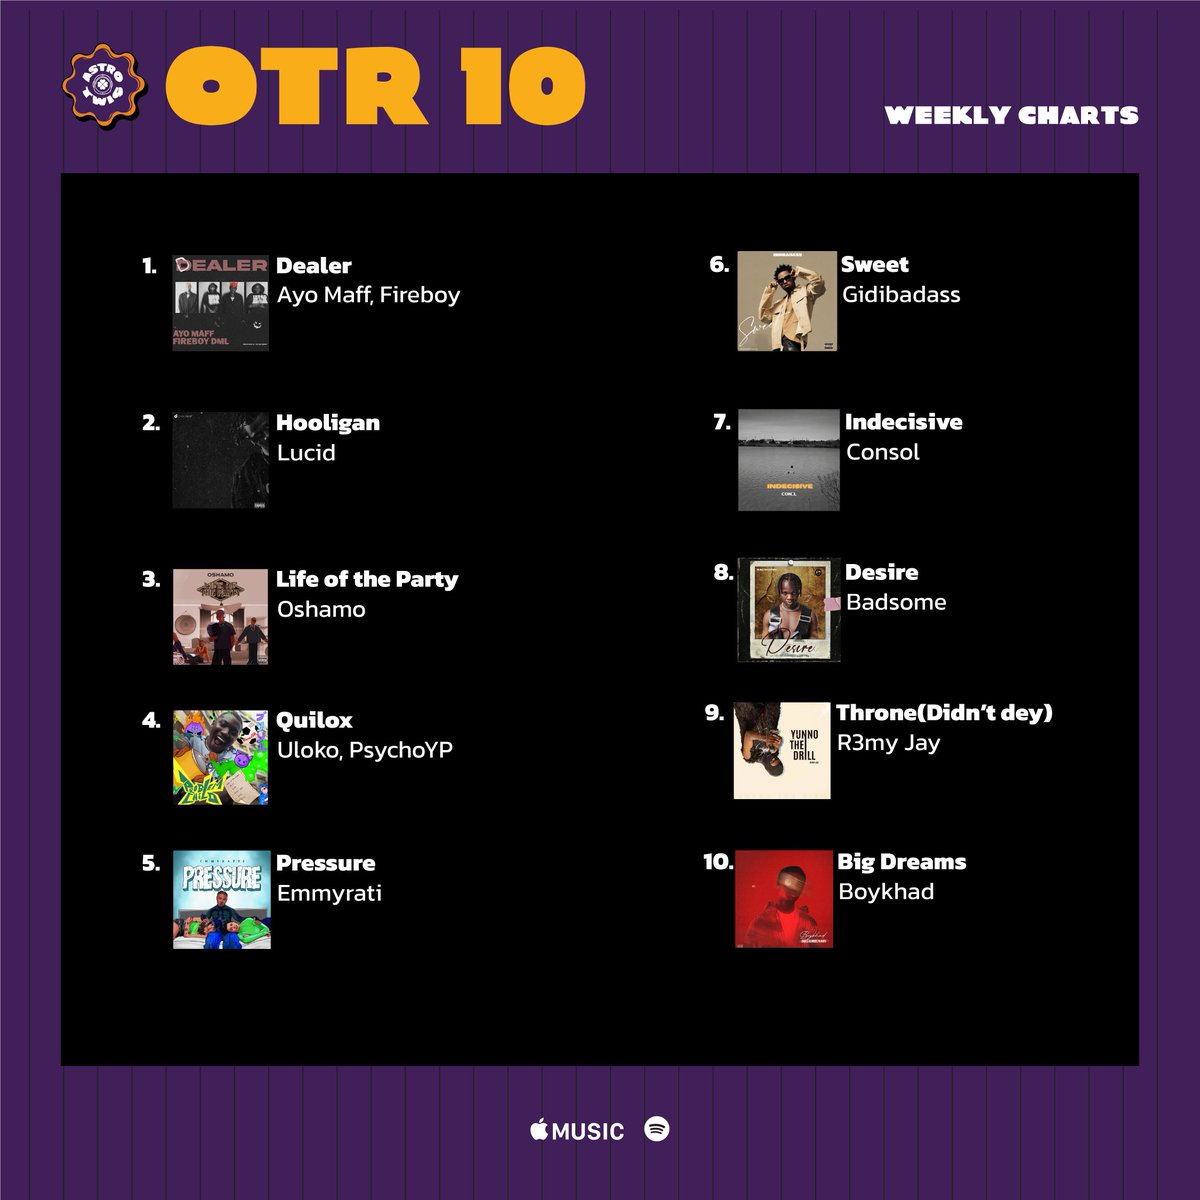 Astrotwig OTR 10 💜🎵

@AyoMaff @lucidthefirst @official_oSHAMO @U1oko & @Emmom007 make this week's Top 5 selections as their melodic offerings were earworms to Astros.

@gidibadass @Yahdreamboy @thefirstbadsome @r3myjay & BoyKhad close up the chart.

🔗: fanlink.tv/astrotwigOTR10